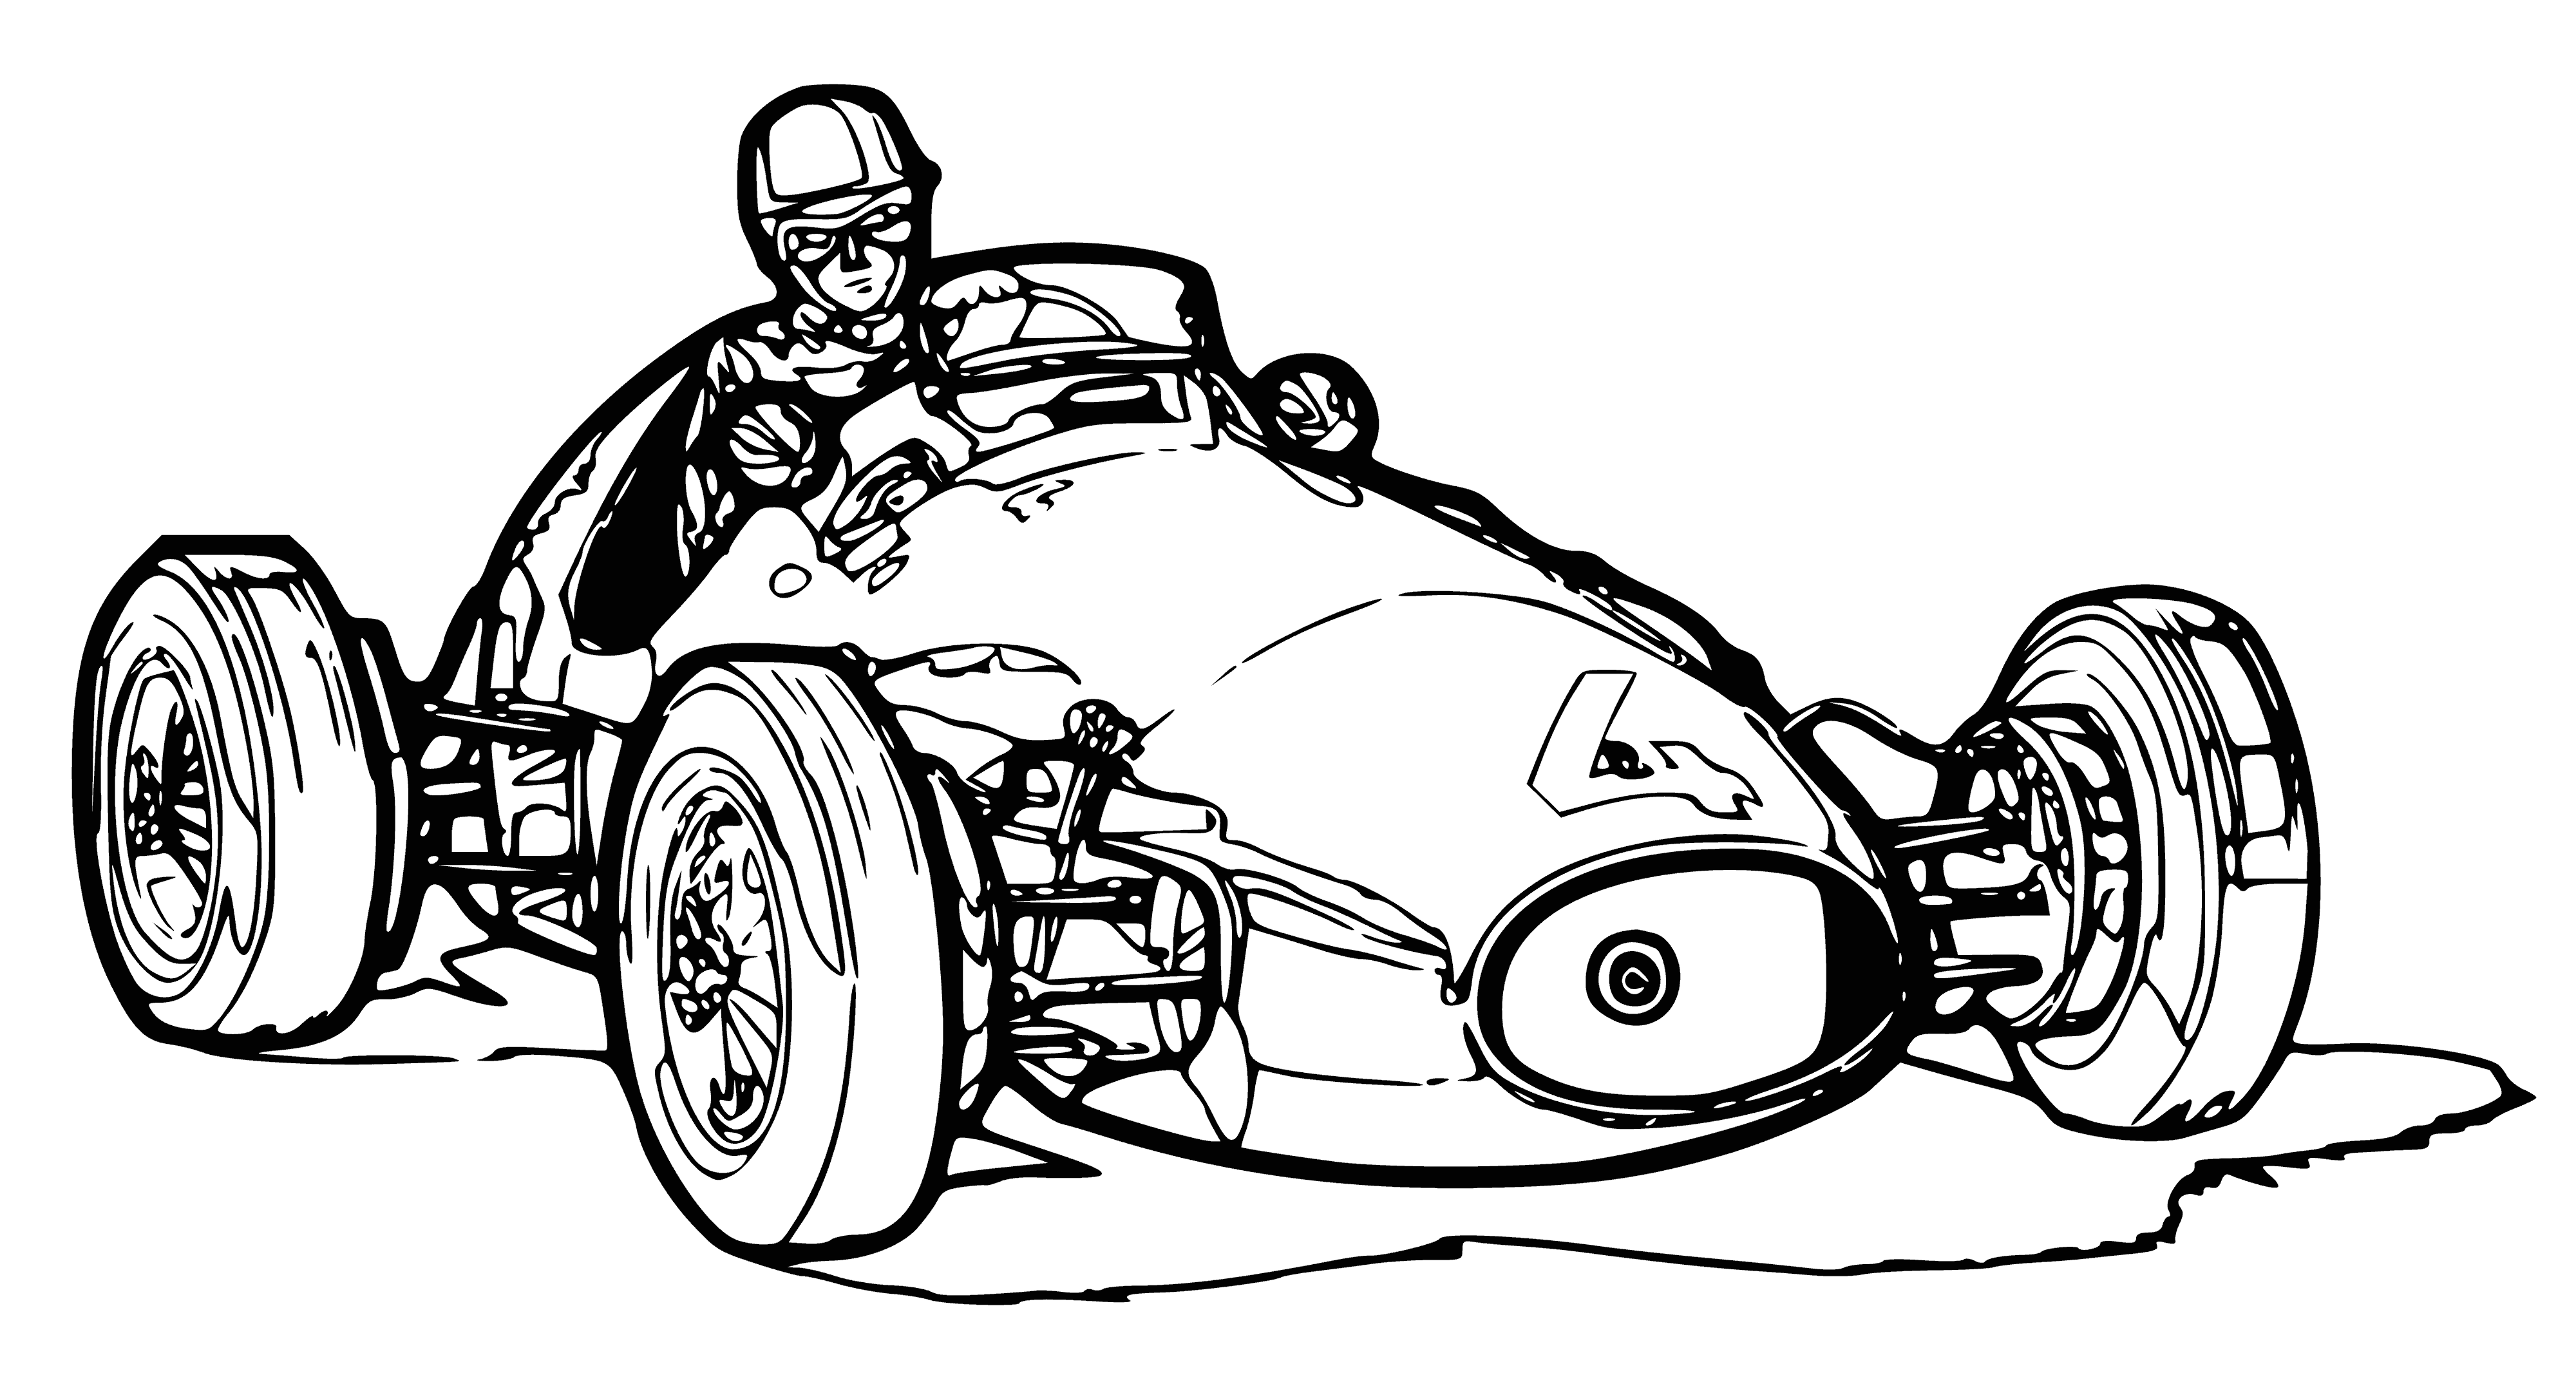 coloring page: 3 racers - yellow, blue, red - racing a dirt track, with people watching.